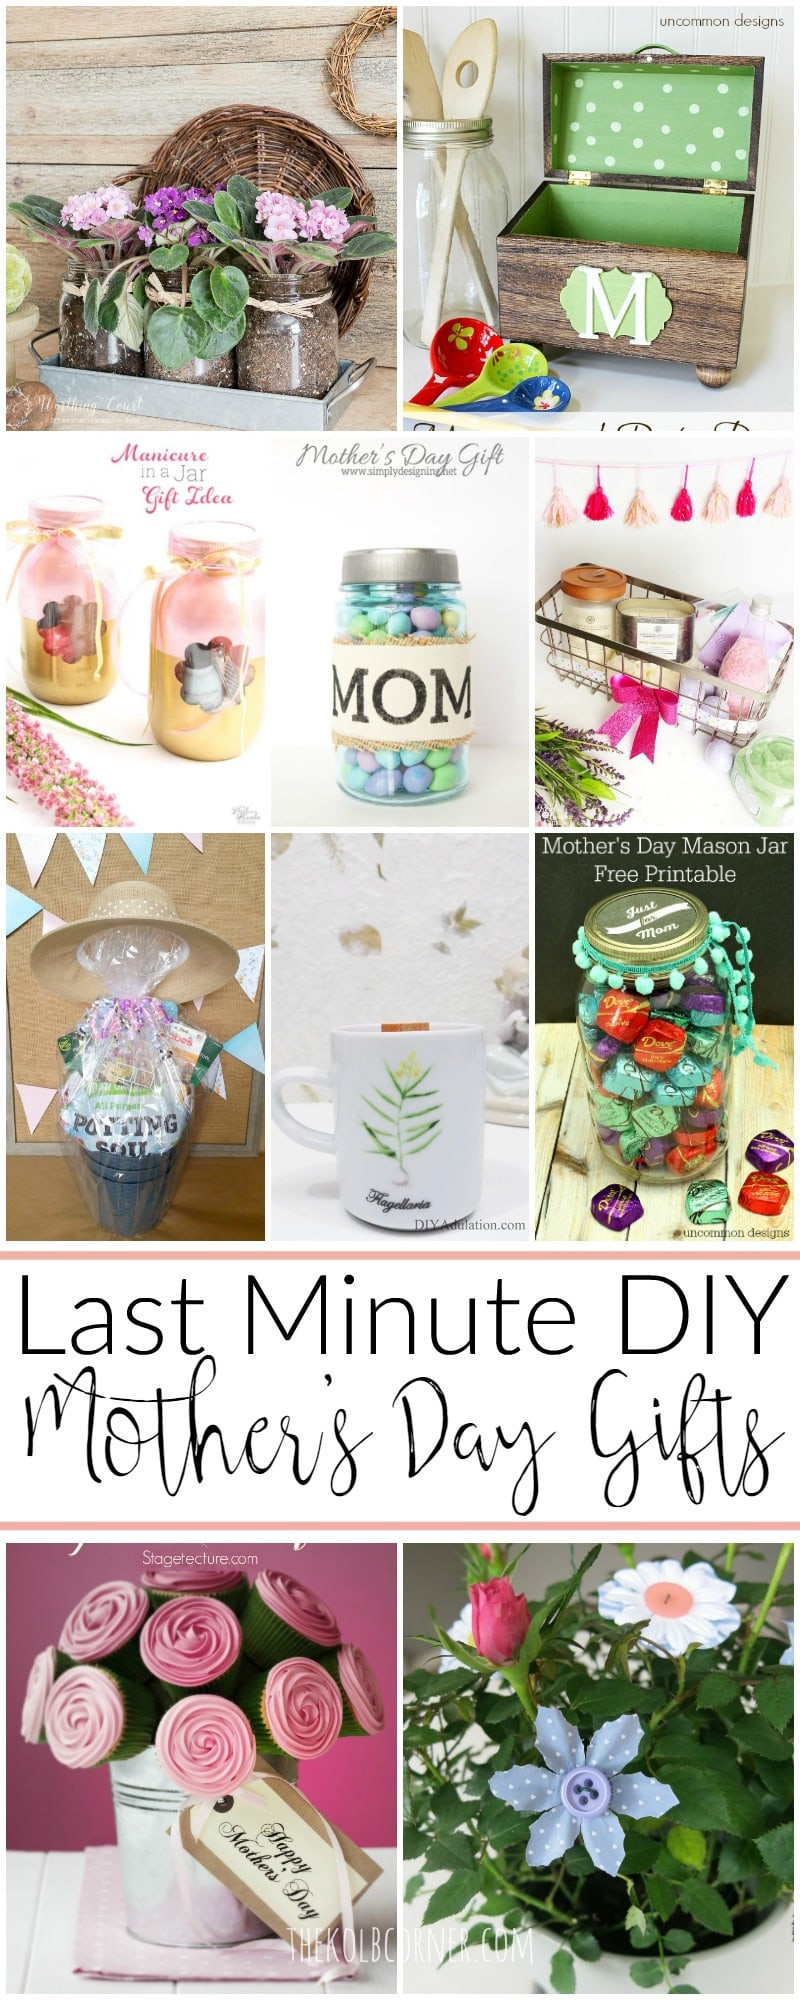 Last Minute DIY Mother'S Day Gifts
 Last Minute DIY Mother s Day Gift Ideas